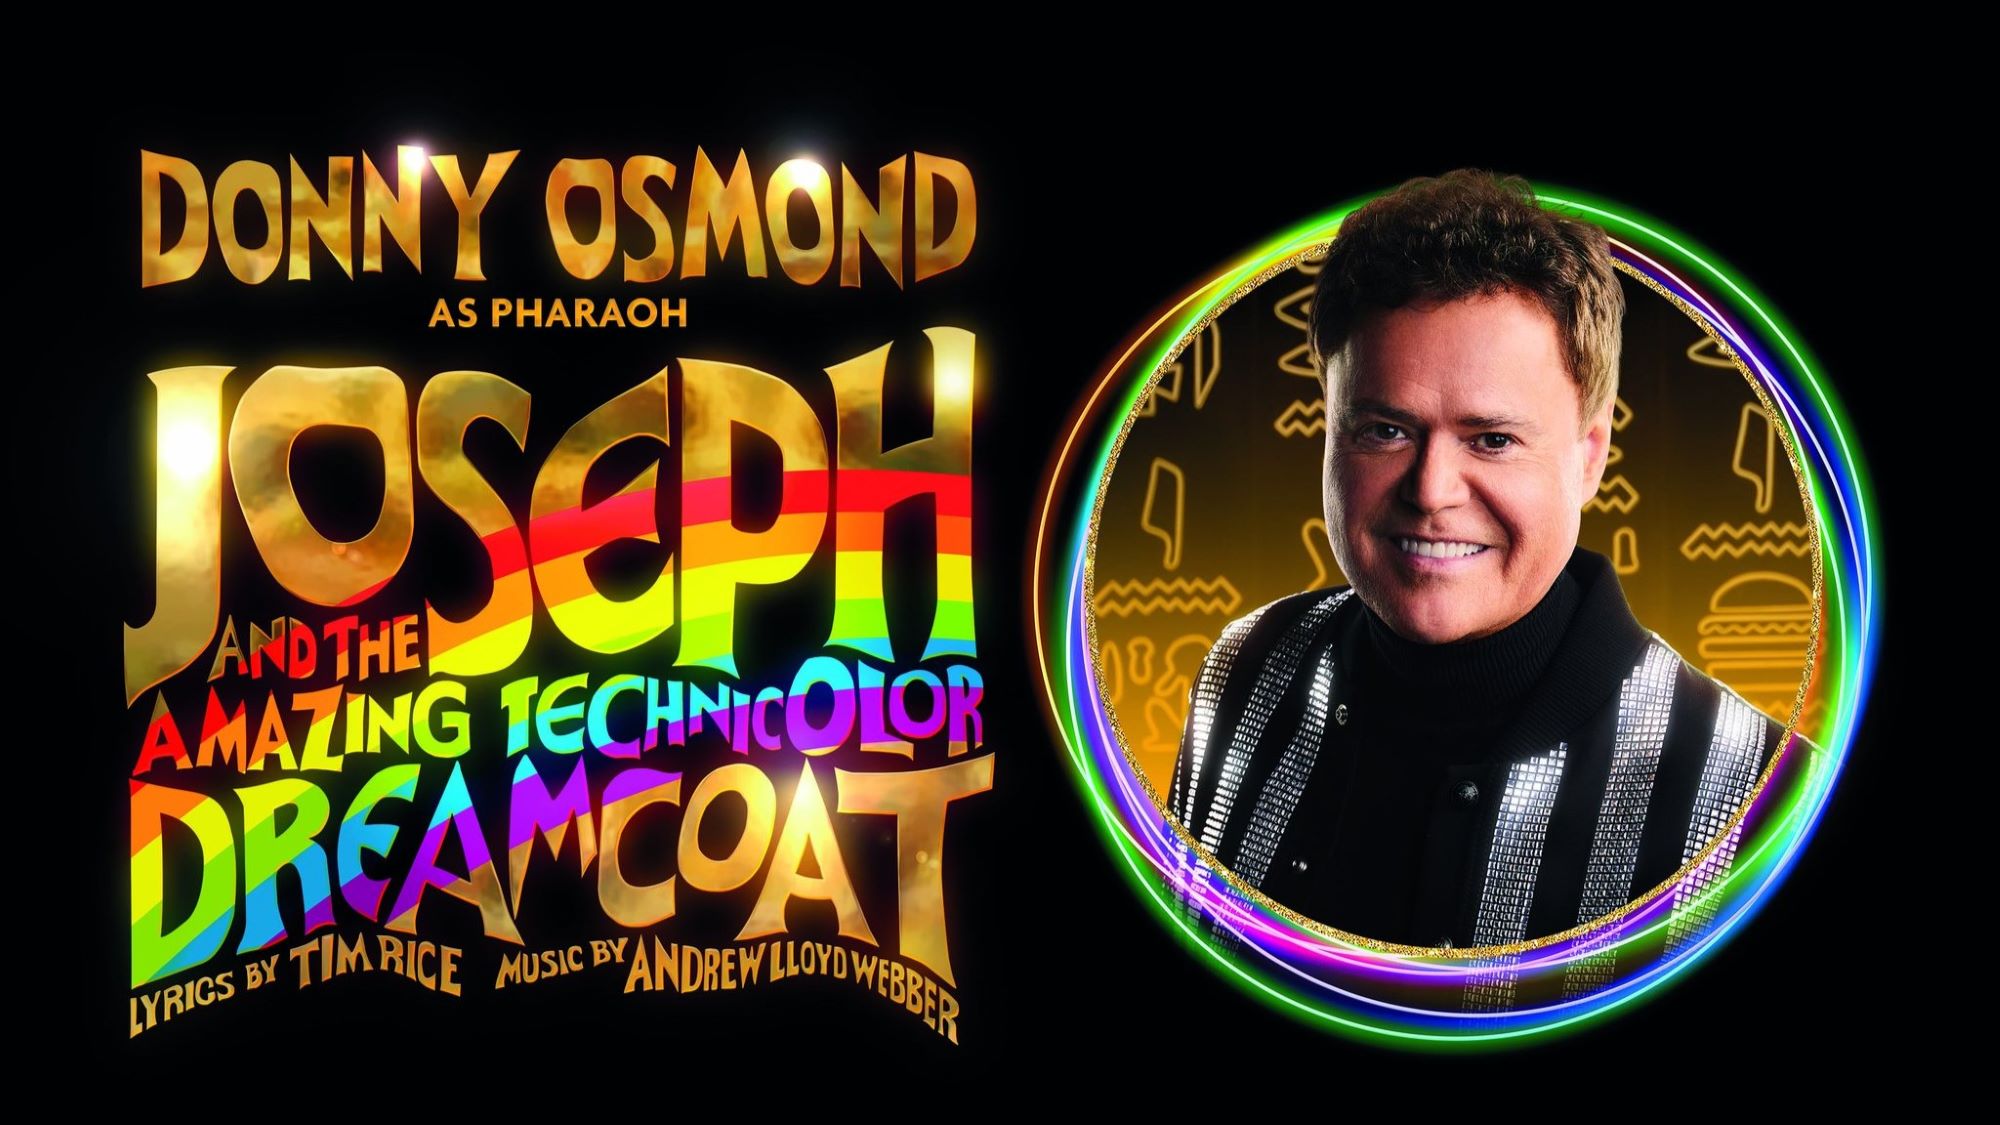 Donny Osmond in Joseph and the Amazing Technicolor Dreamcoat